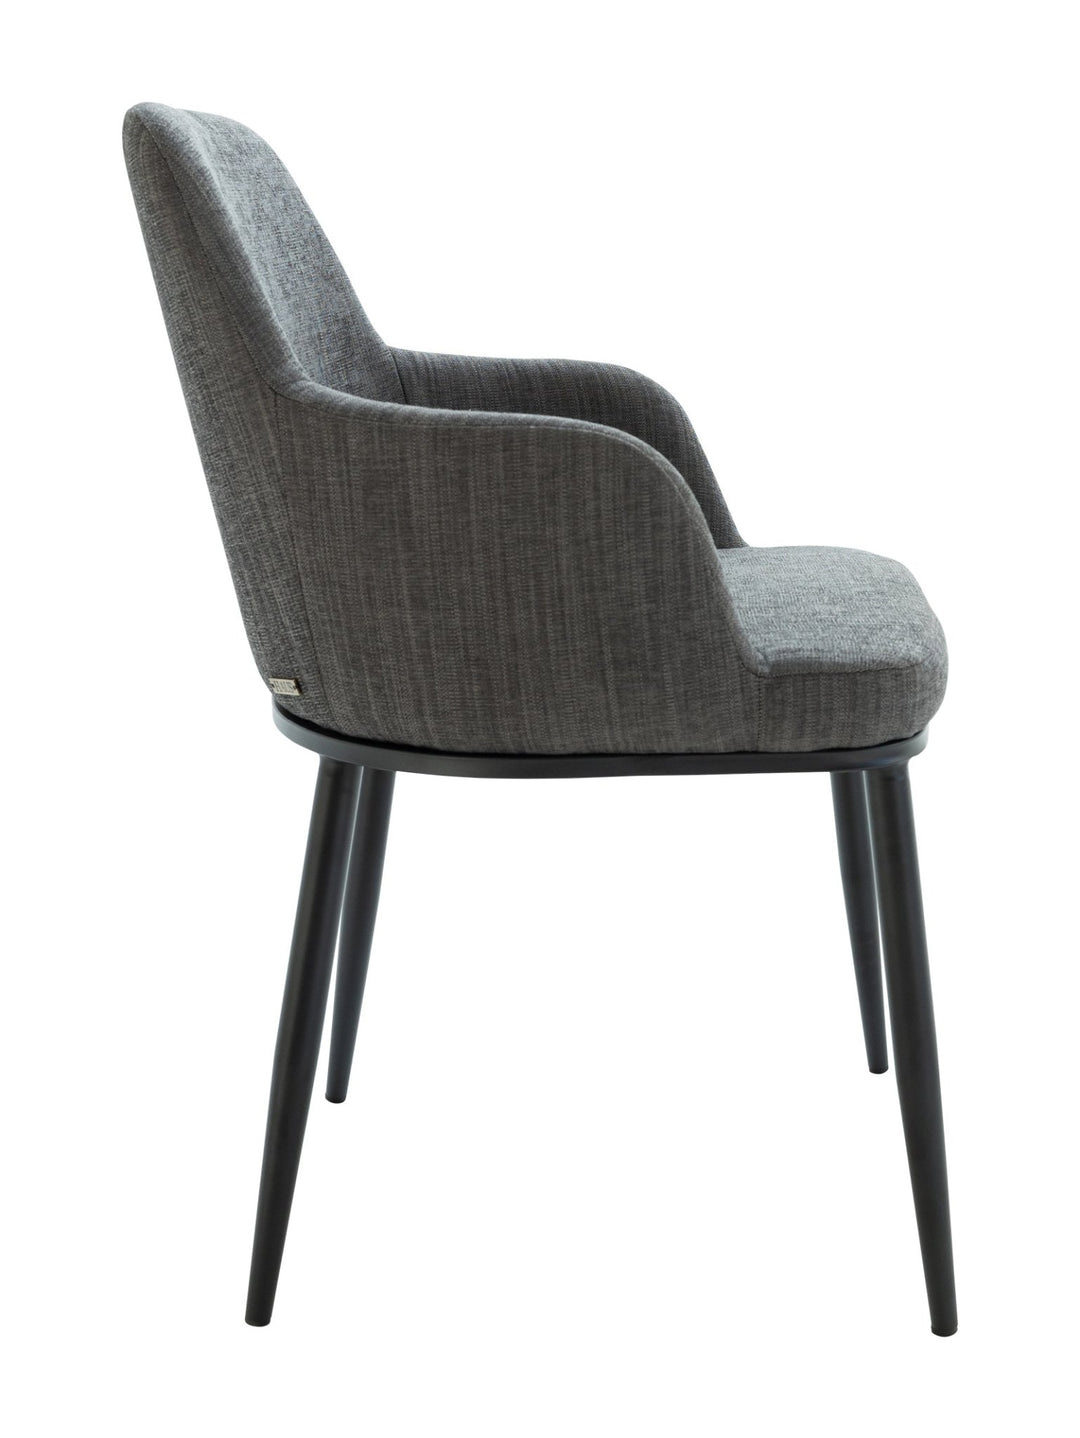 Catherine Dining Chair in Hunter Midnight - Kitchen & Dining Room Chairs - Hertex Haus - badge_fabric